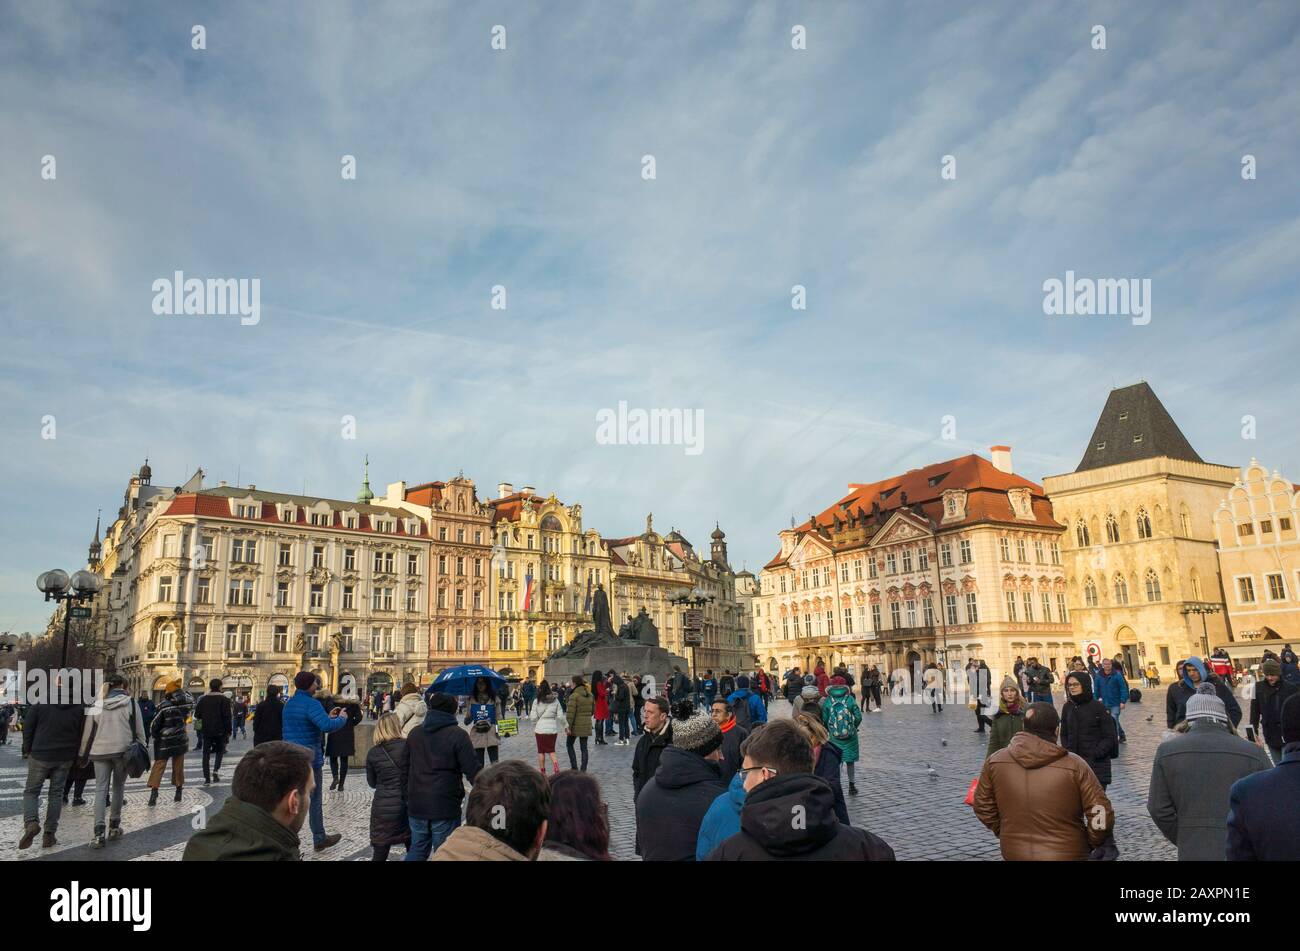 Prague, Bohemian / Czech Republic - 12-01-2020: Nice architecture in the old city. Stock Photo